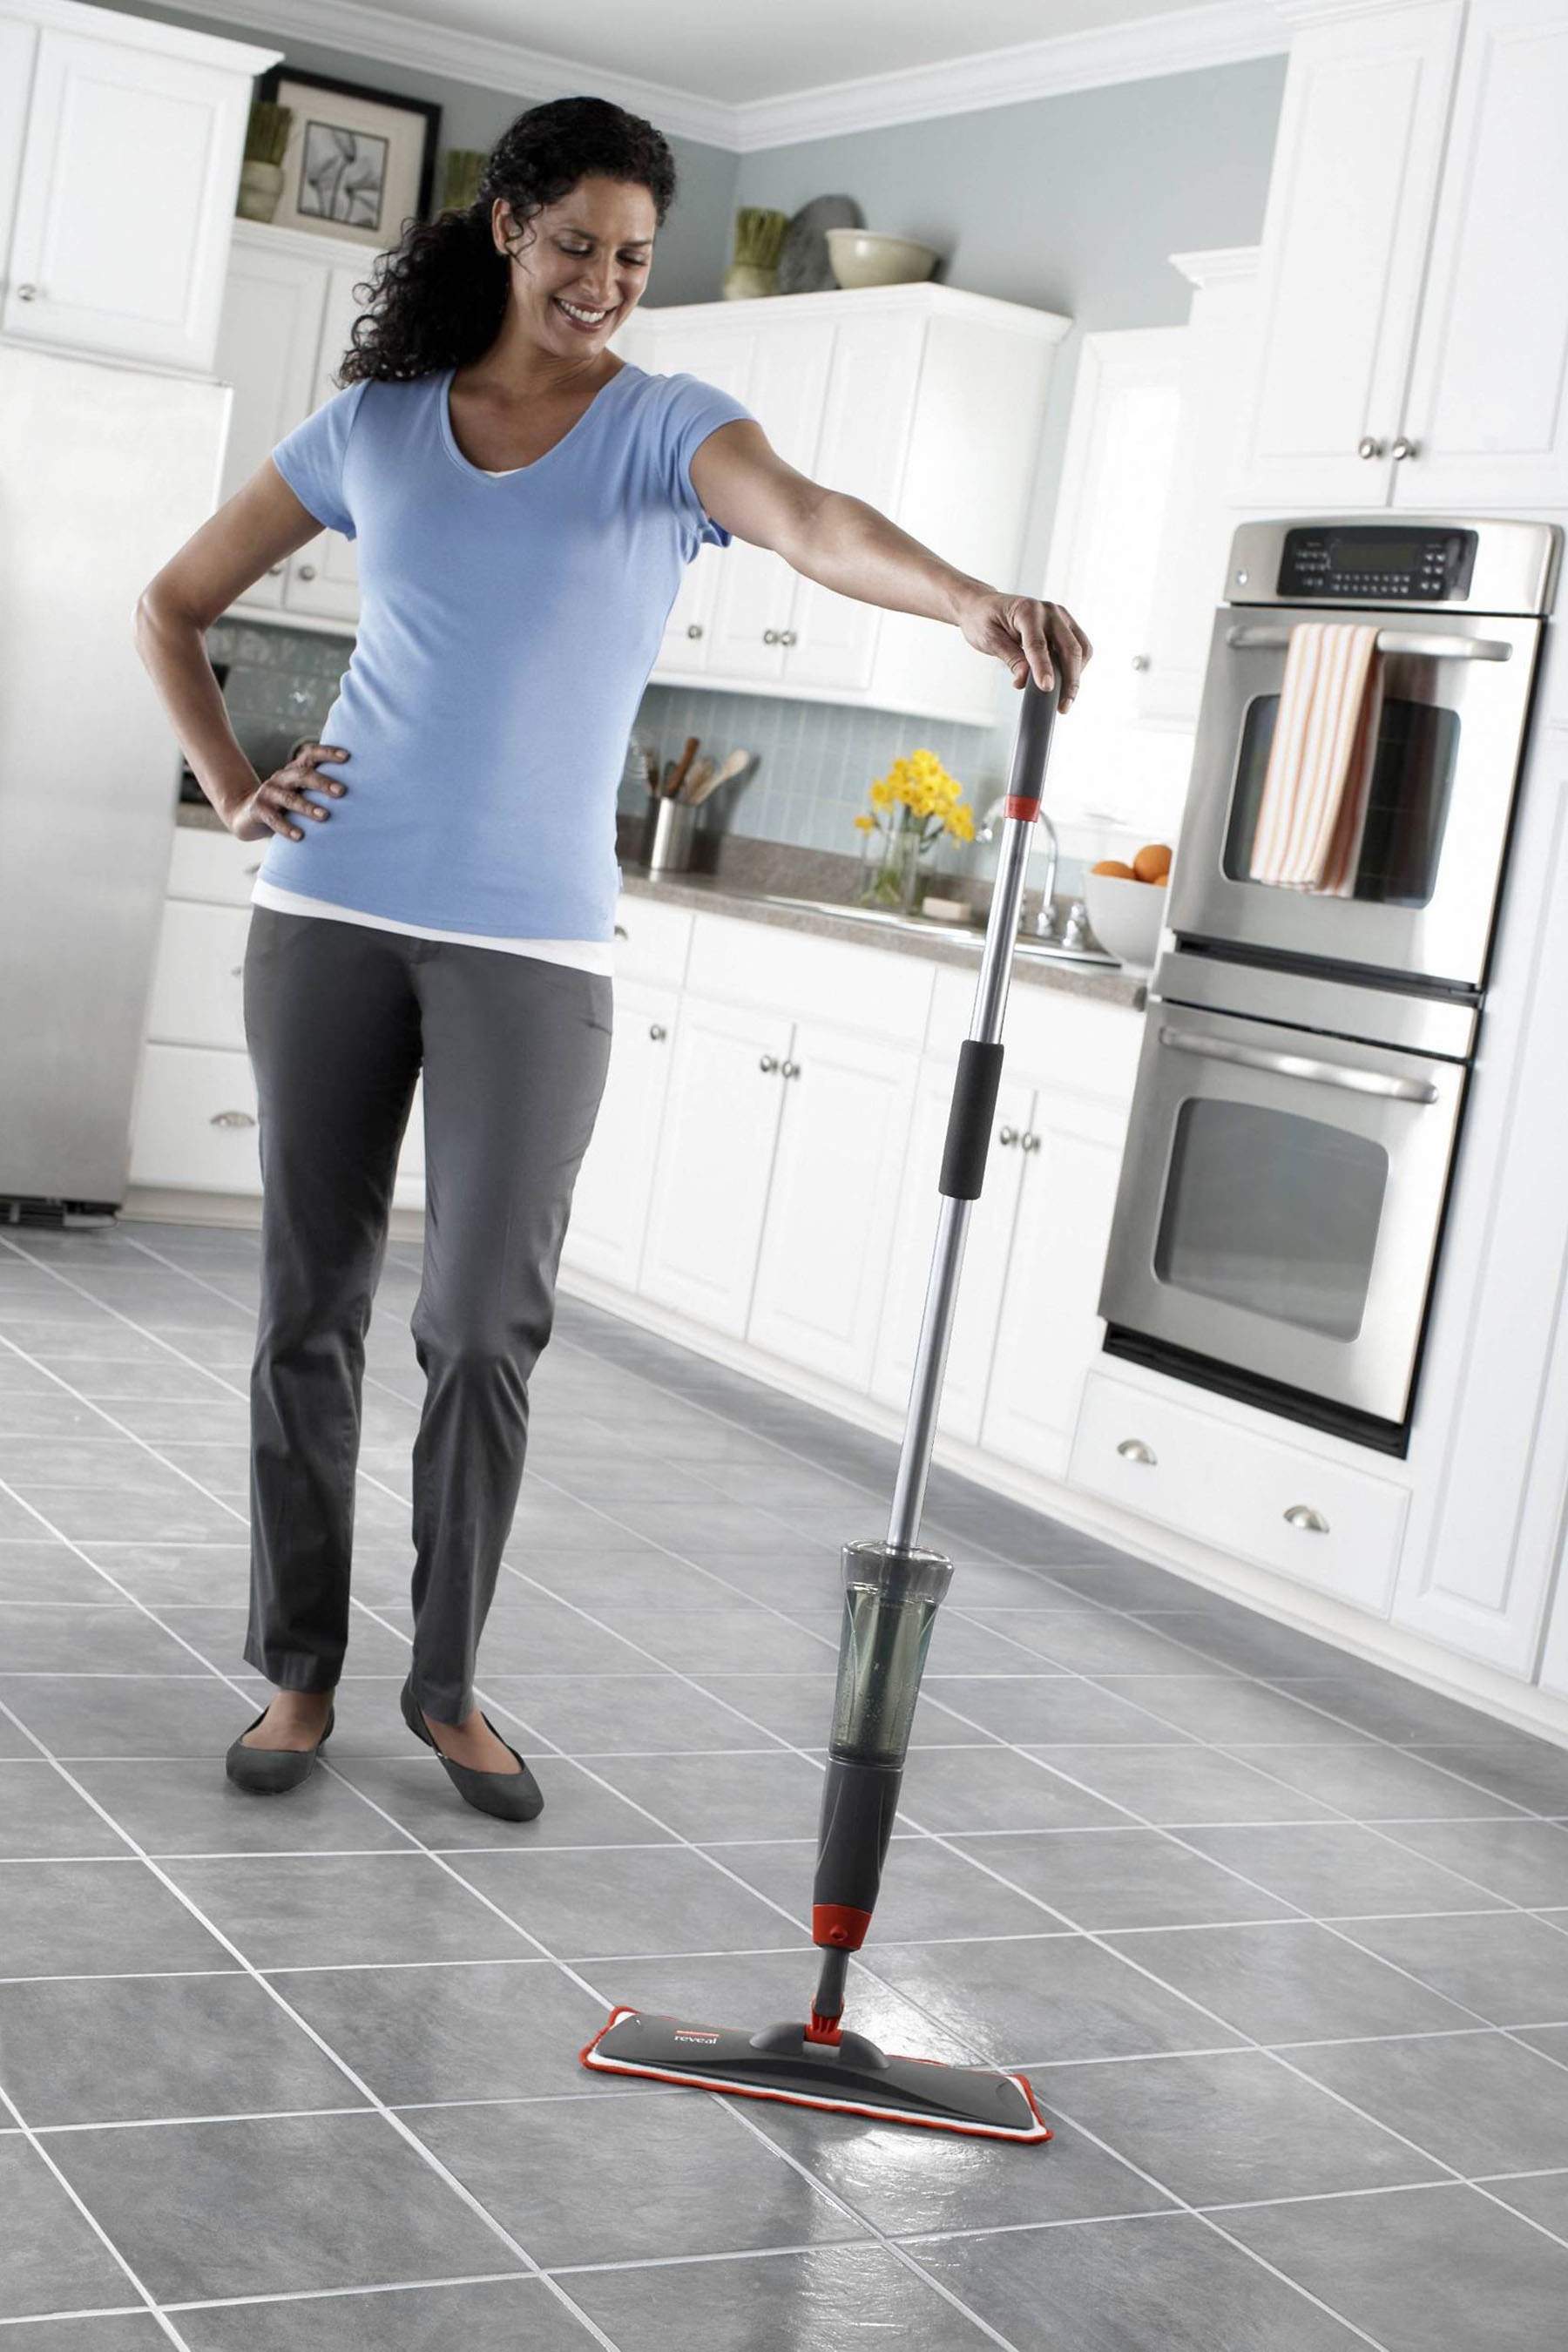 Rubbermaid's New Reveal Spray Mop Helps Consumers Clean Better